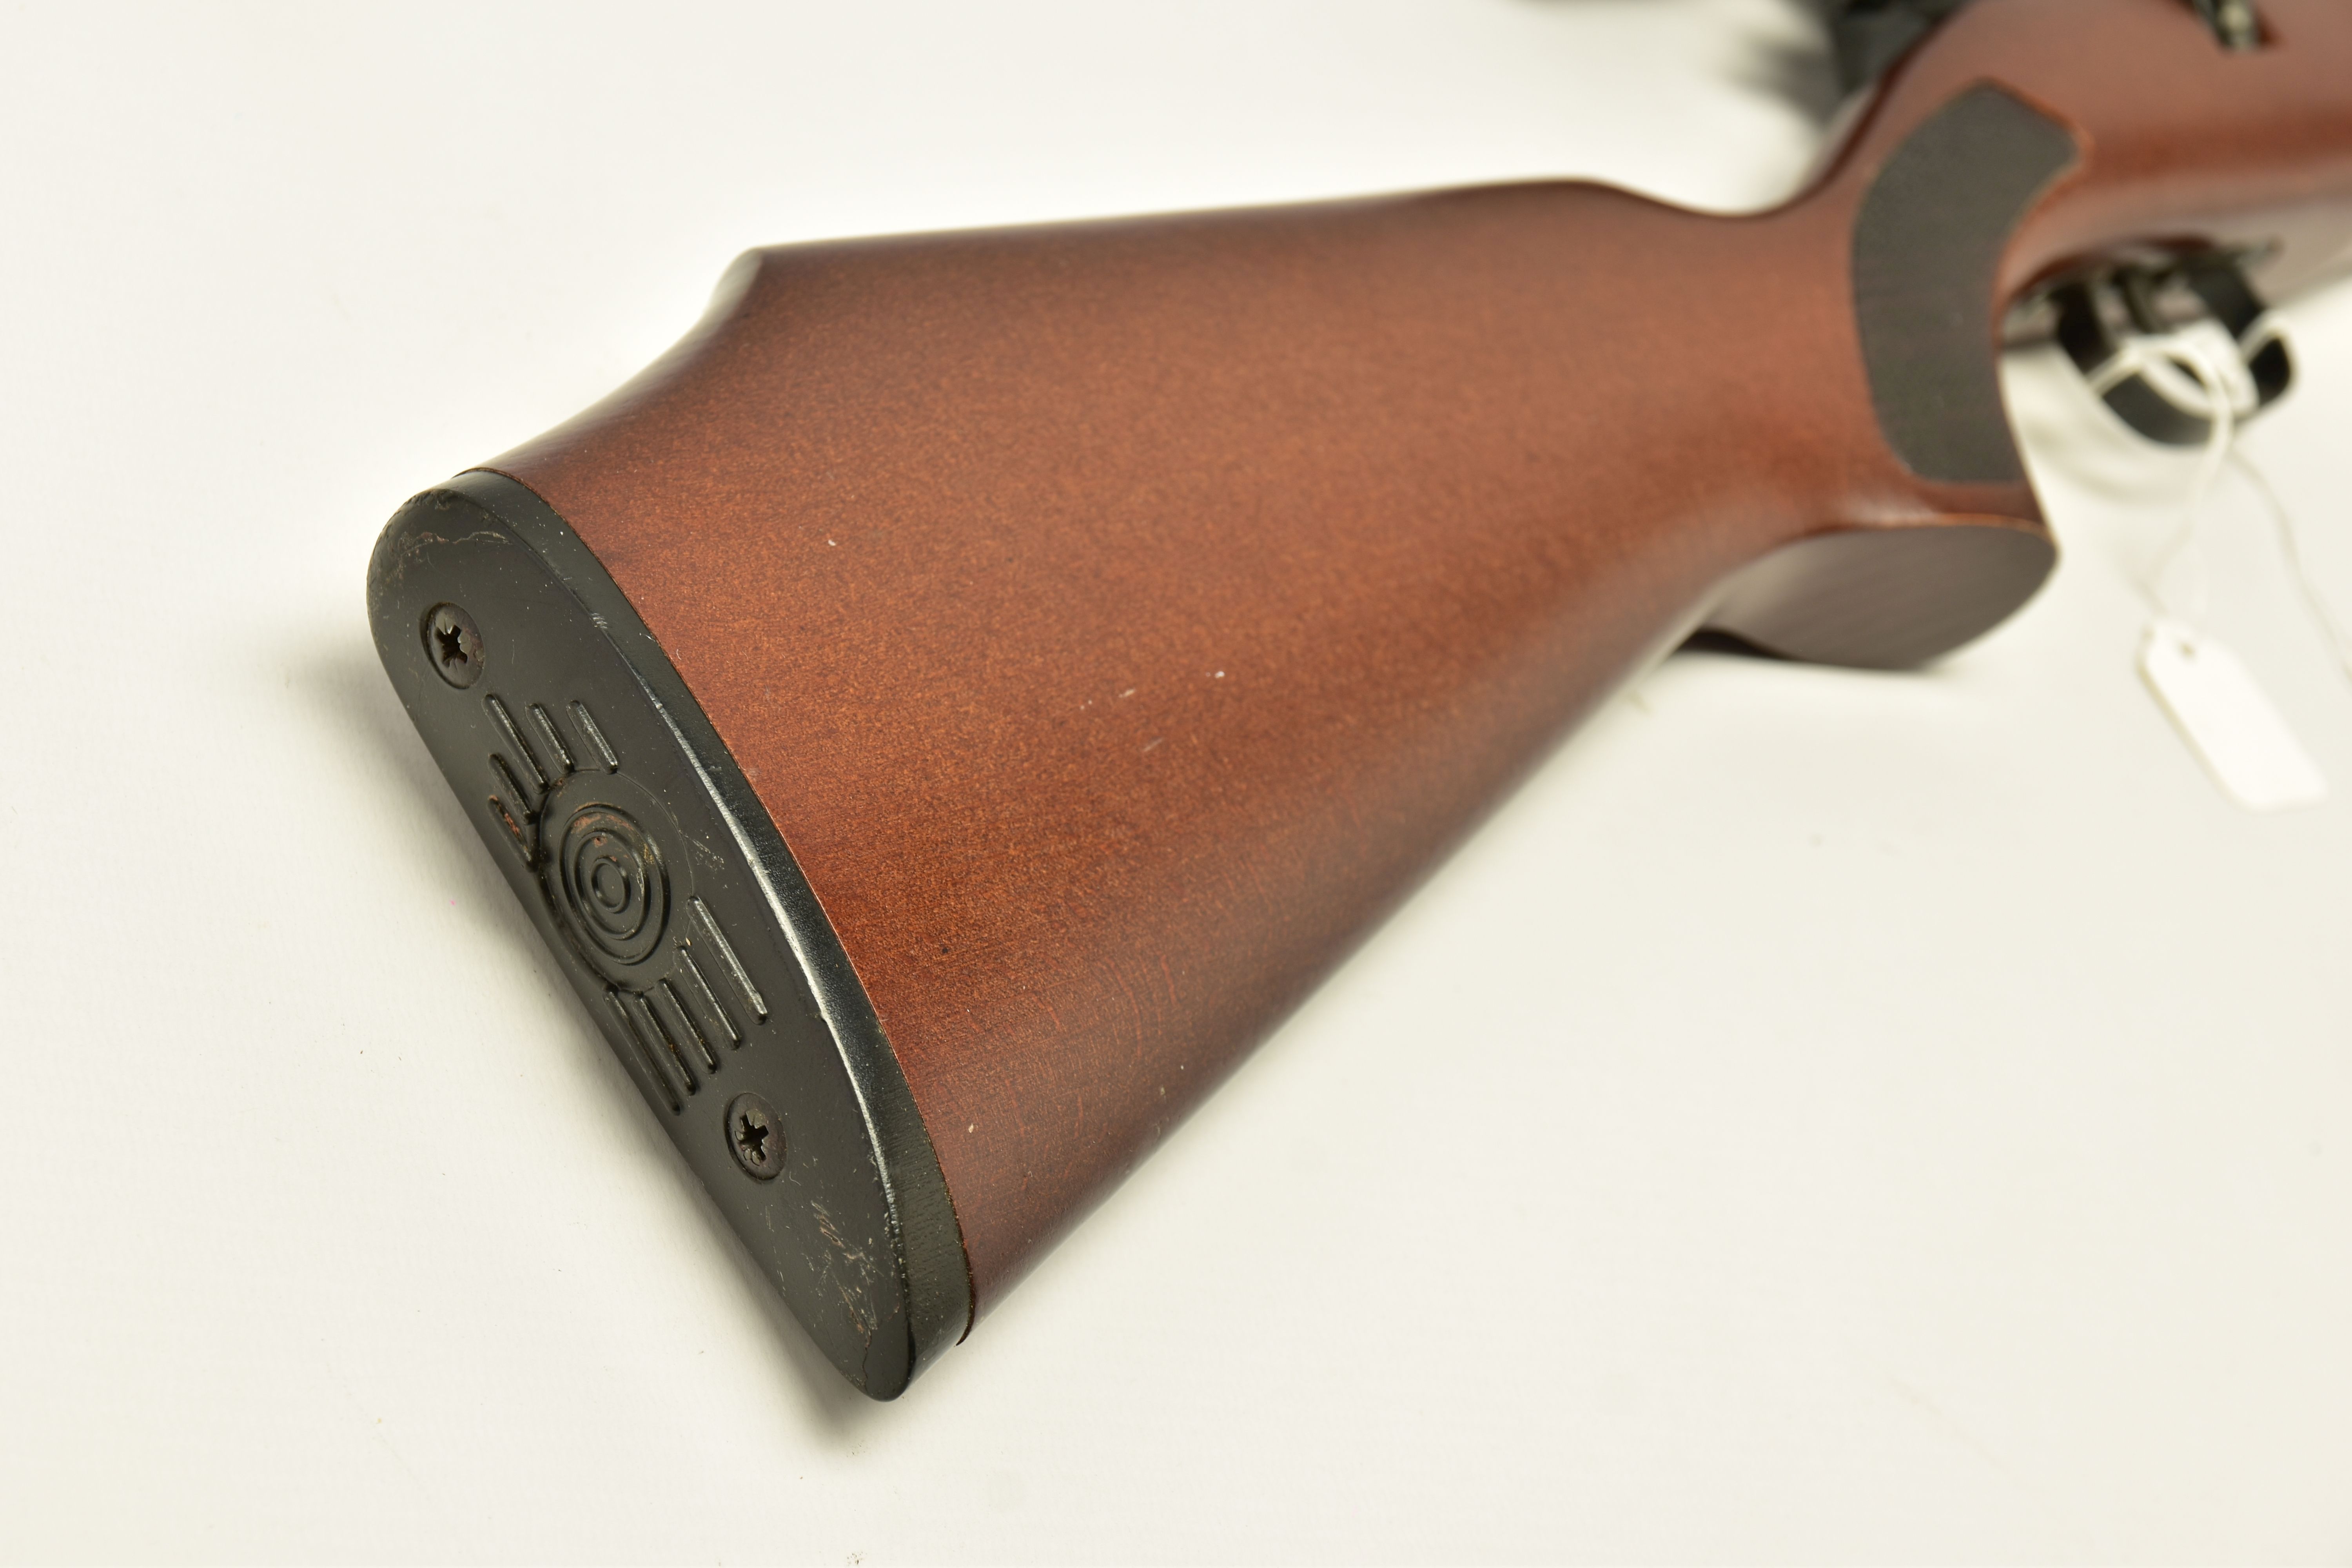 A .22 '' ROTARY MAGAZINE PUMP UP AIR RIFLE fitted with a beech stock, in working order and excellent - Image 9 of 9